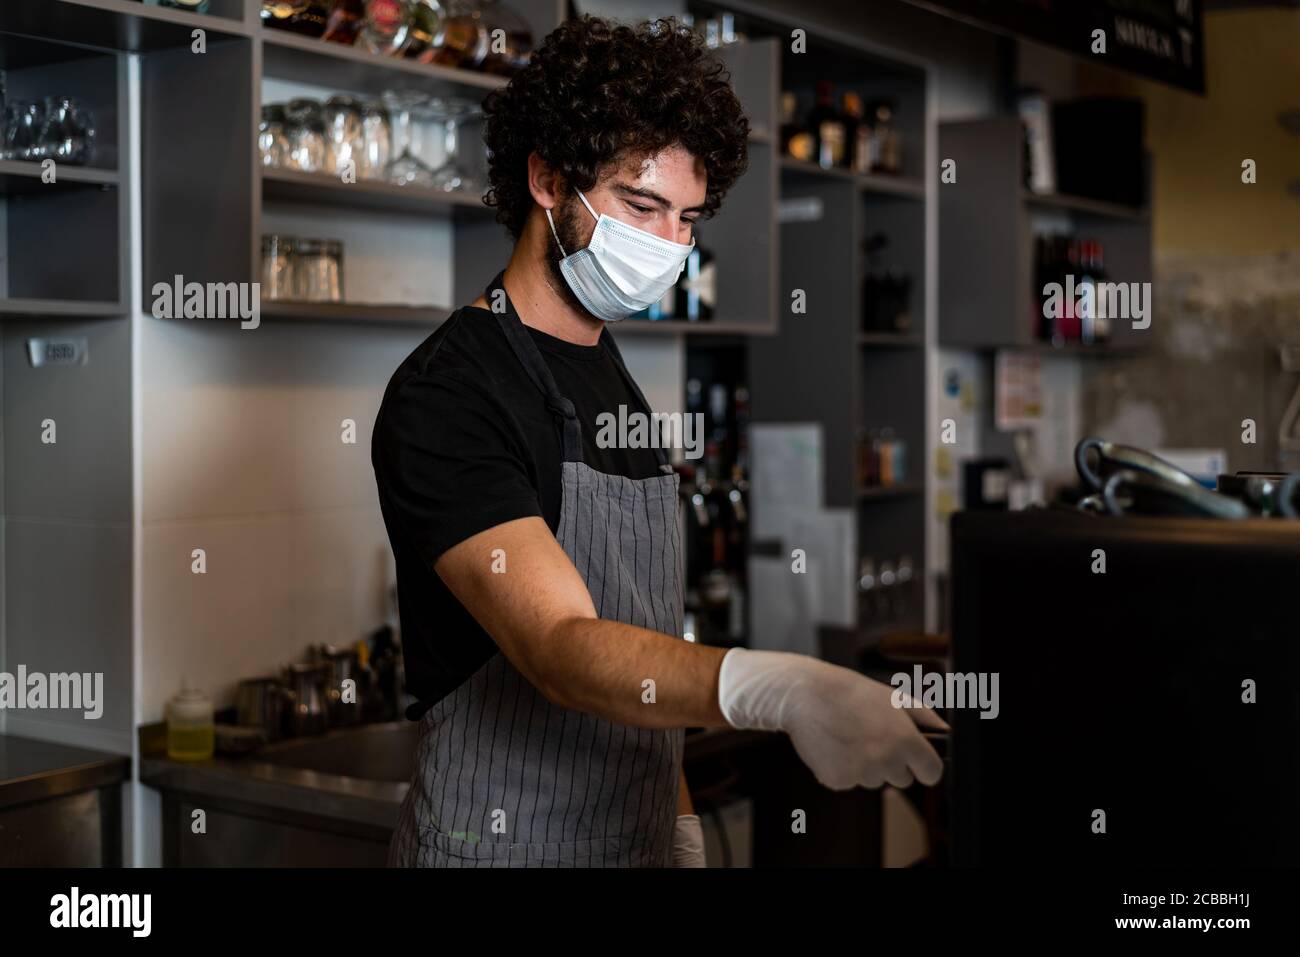 Young man, barista, making coffee espresso while wearing surgical mask and gloves for preventing corona virus spread - Bar safety working concept. Stock Photo